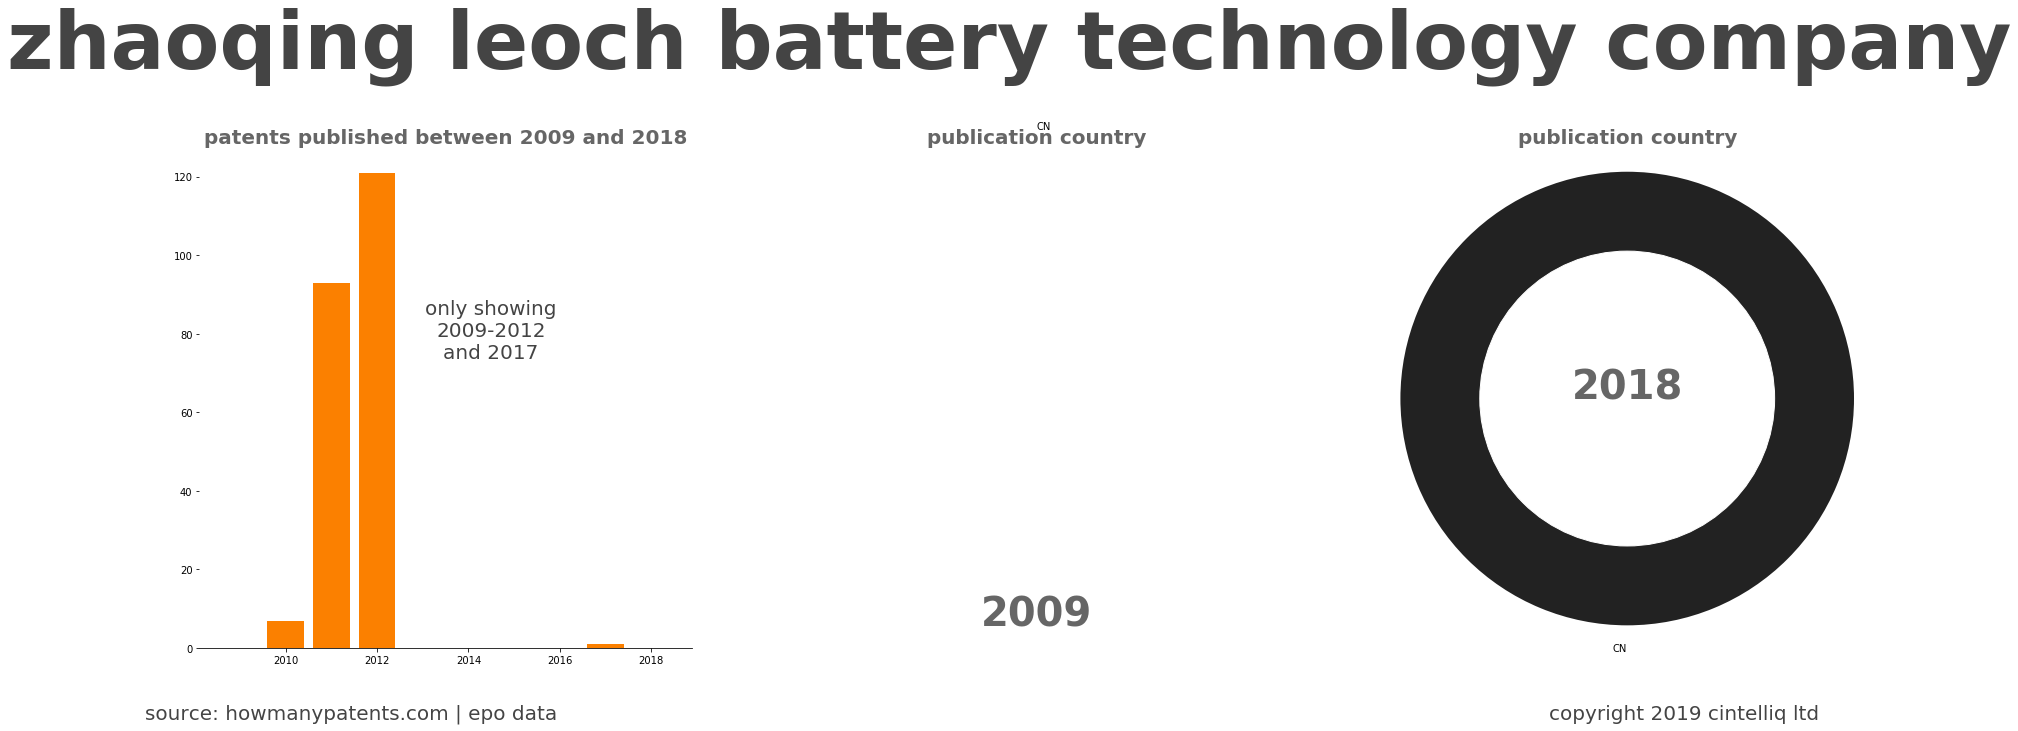 summary of patents for Zhaoqing Leoch Battery Technology Company